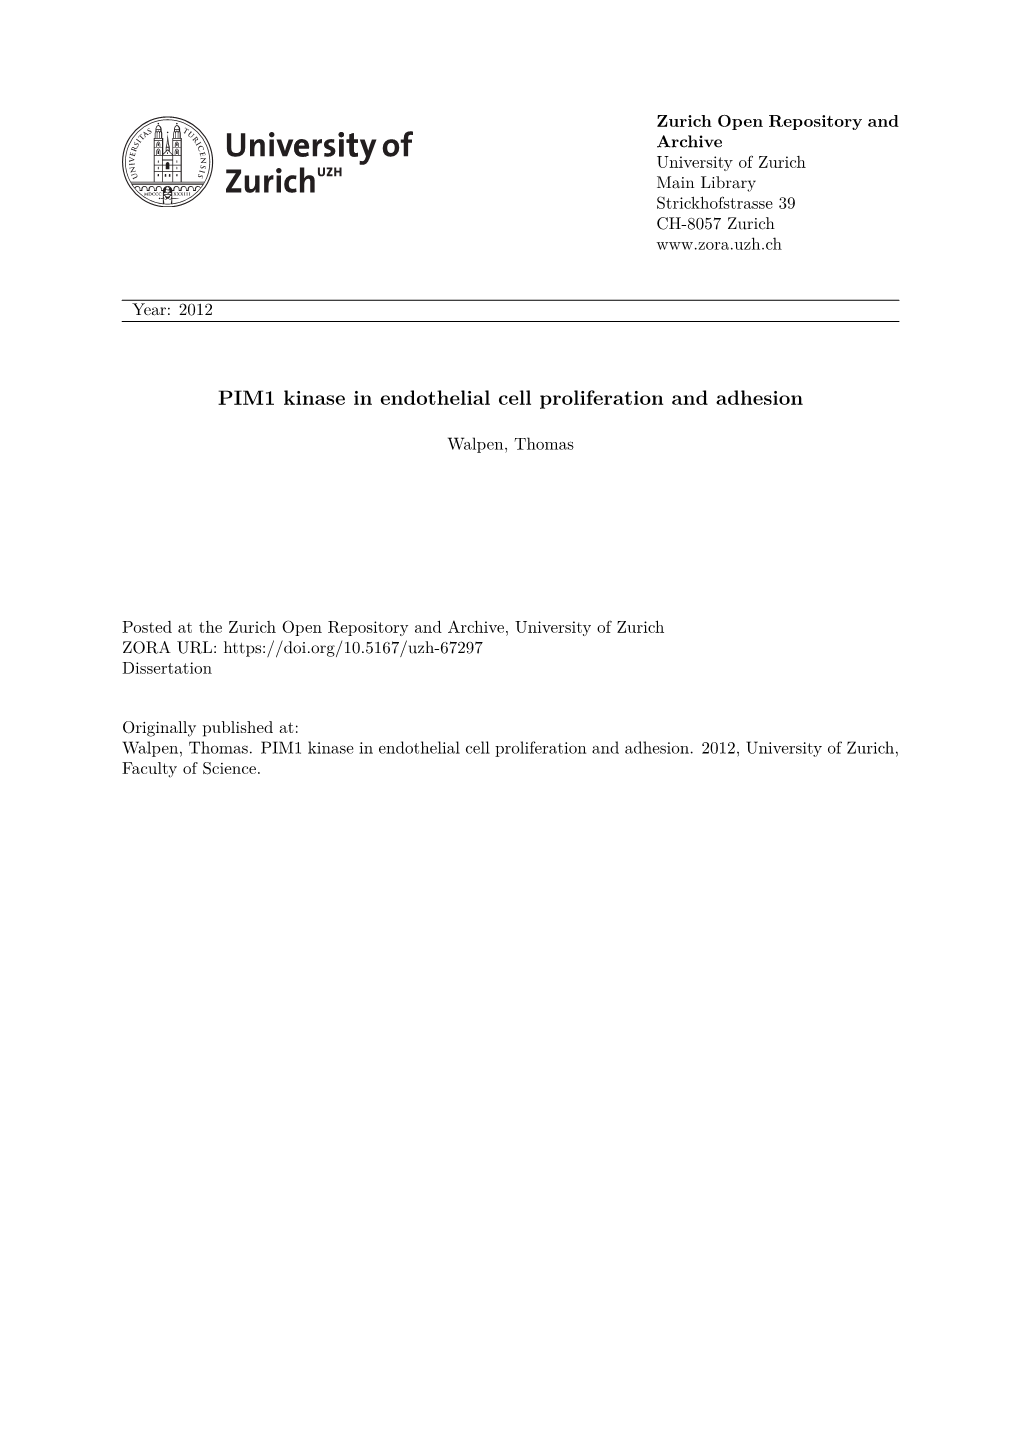 PIM1 Kinase in Endothelial Cell Proliferation and Adhesion